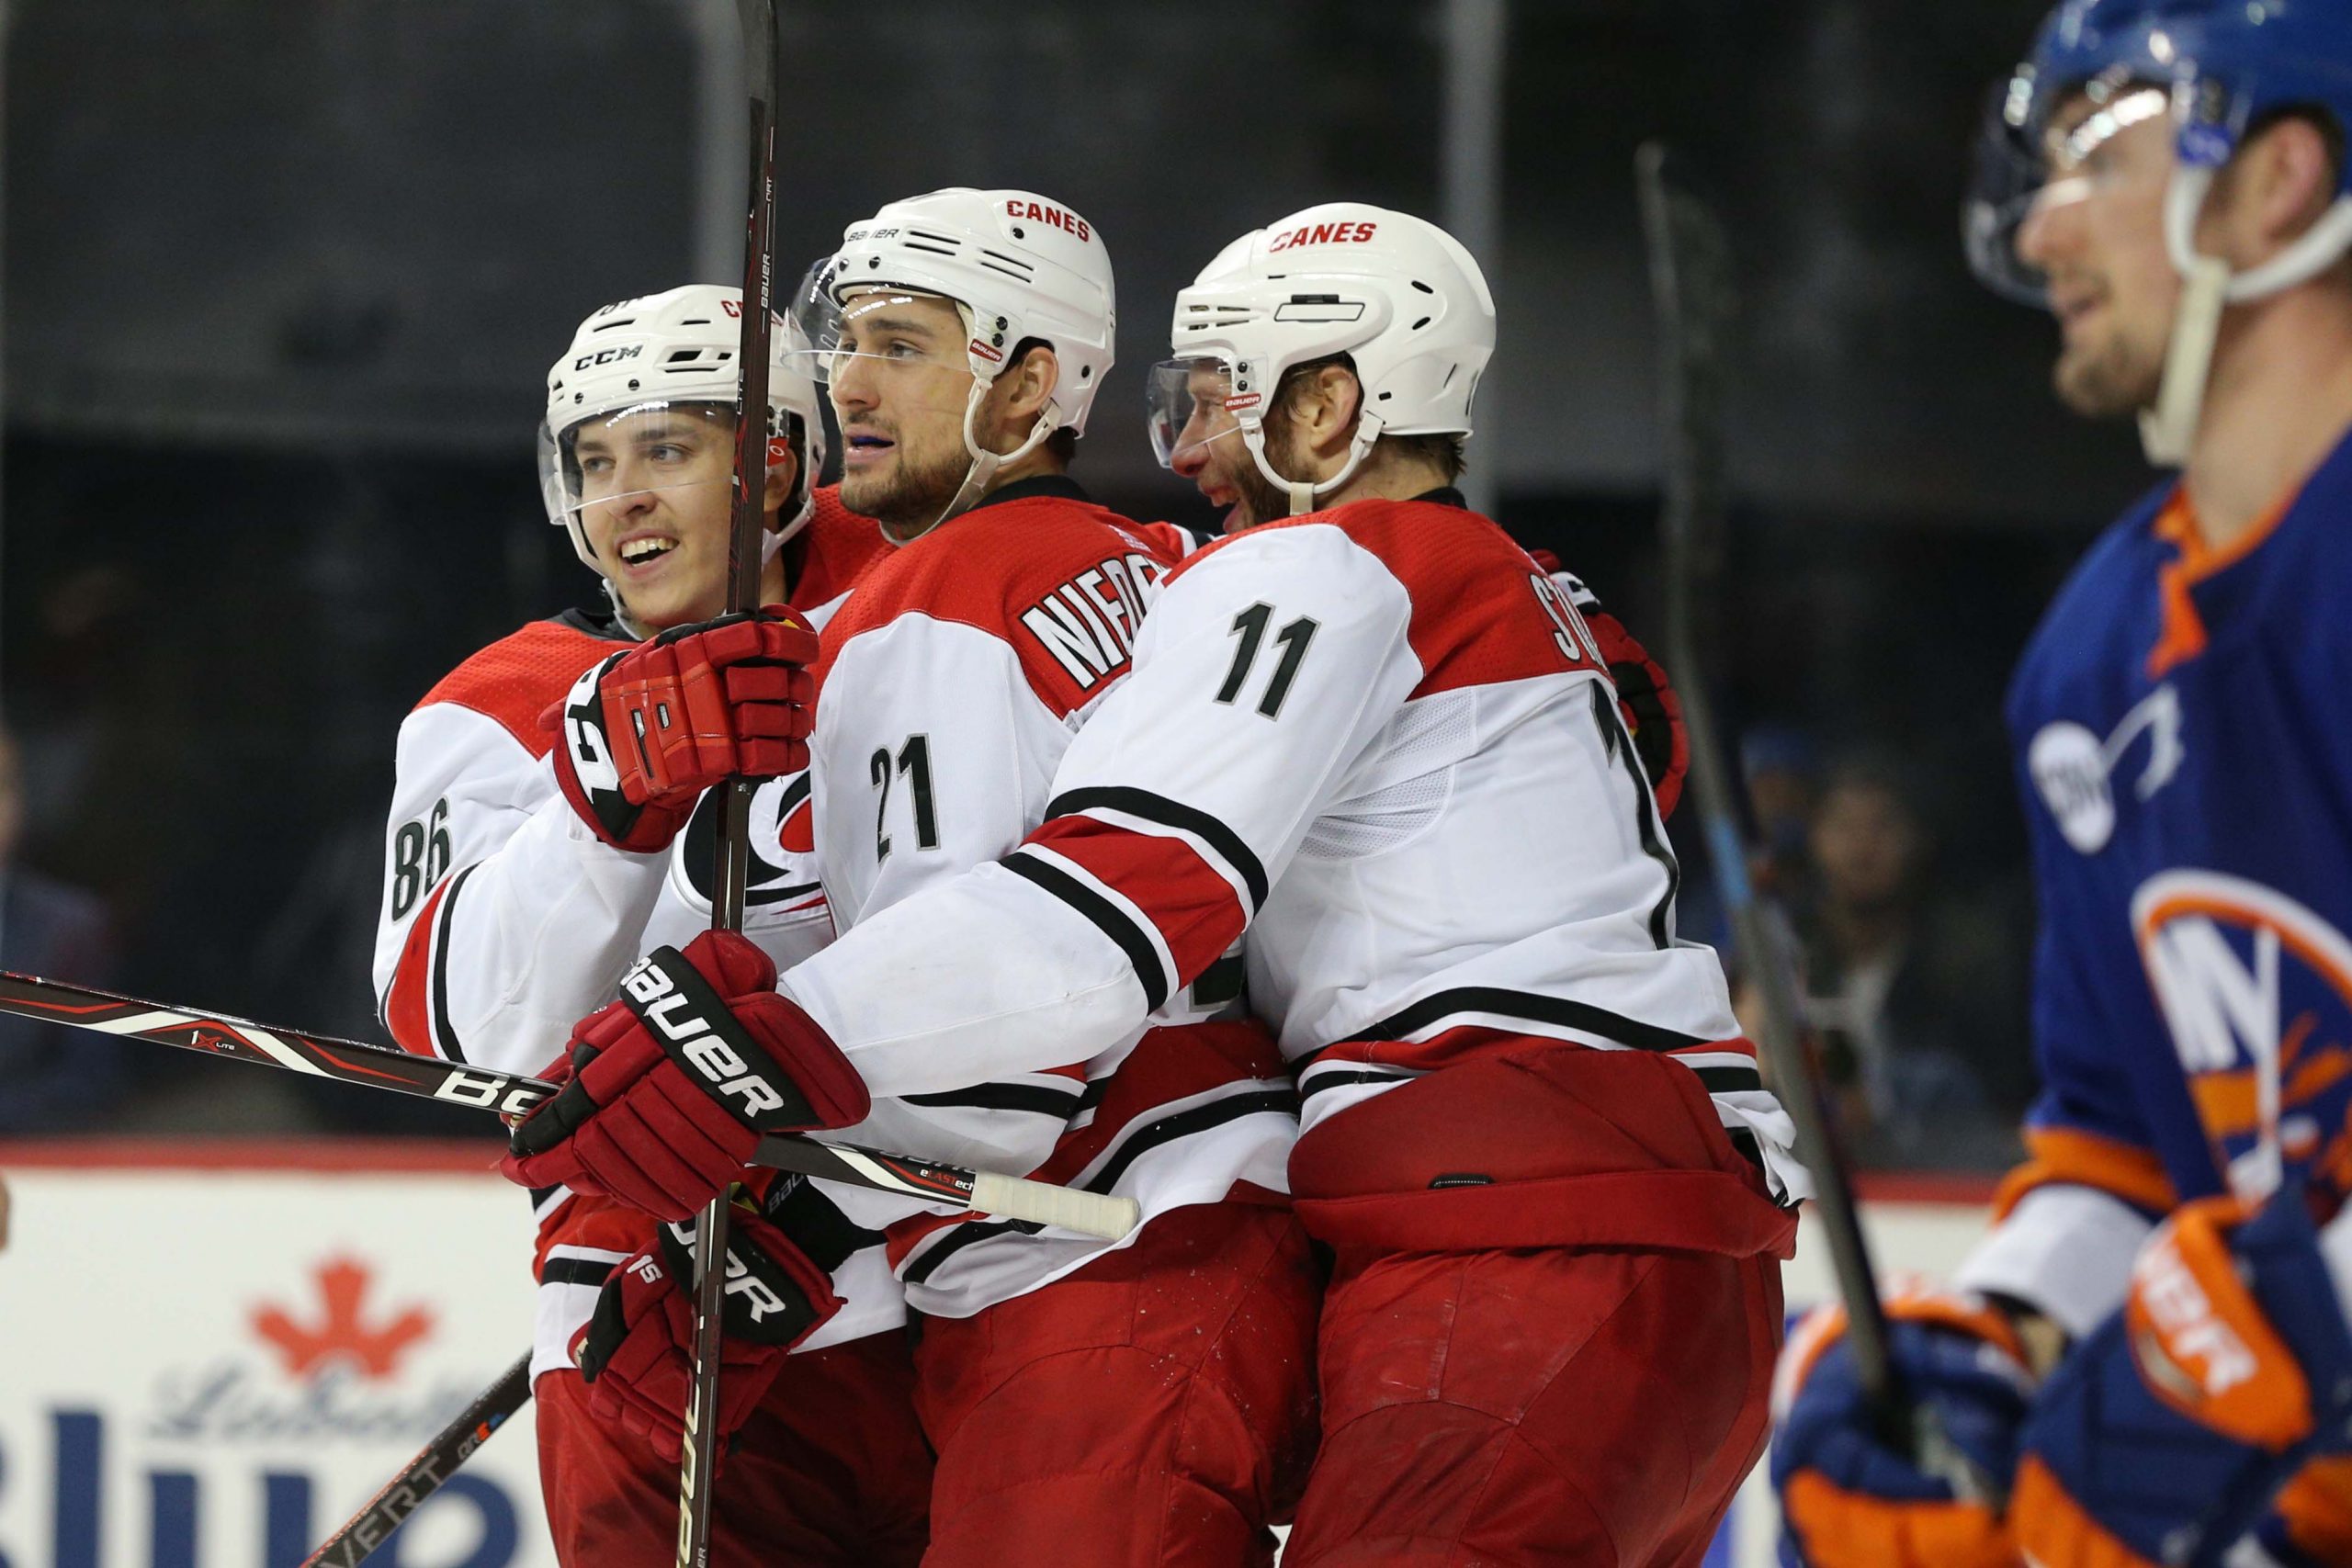 Apr 28, 2019; Brooklyn, NY, USA; Carolina Hurricanes right wing Nino Niederreiter (21) celebrates his goal against the New York Islanders with left wing Teuvo Teravainen (86) and center Jordan Staal (11) during the third period of game two of the second round of the 2019 Stanley Cup Playoffs at Barclays Center. Mandatory Credit: Brad Penner-USA TODAY Sports